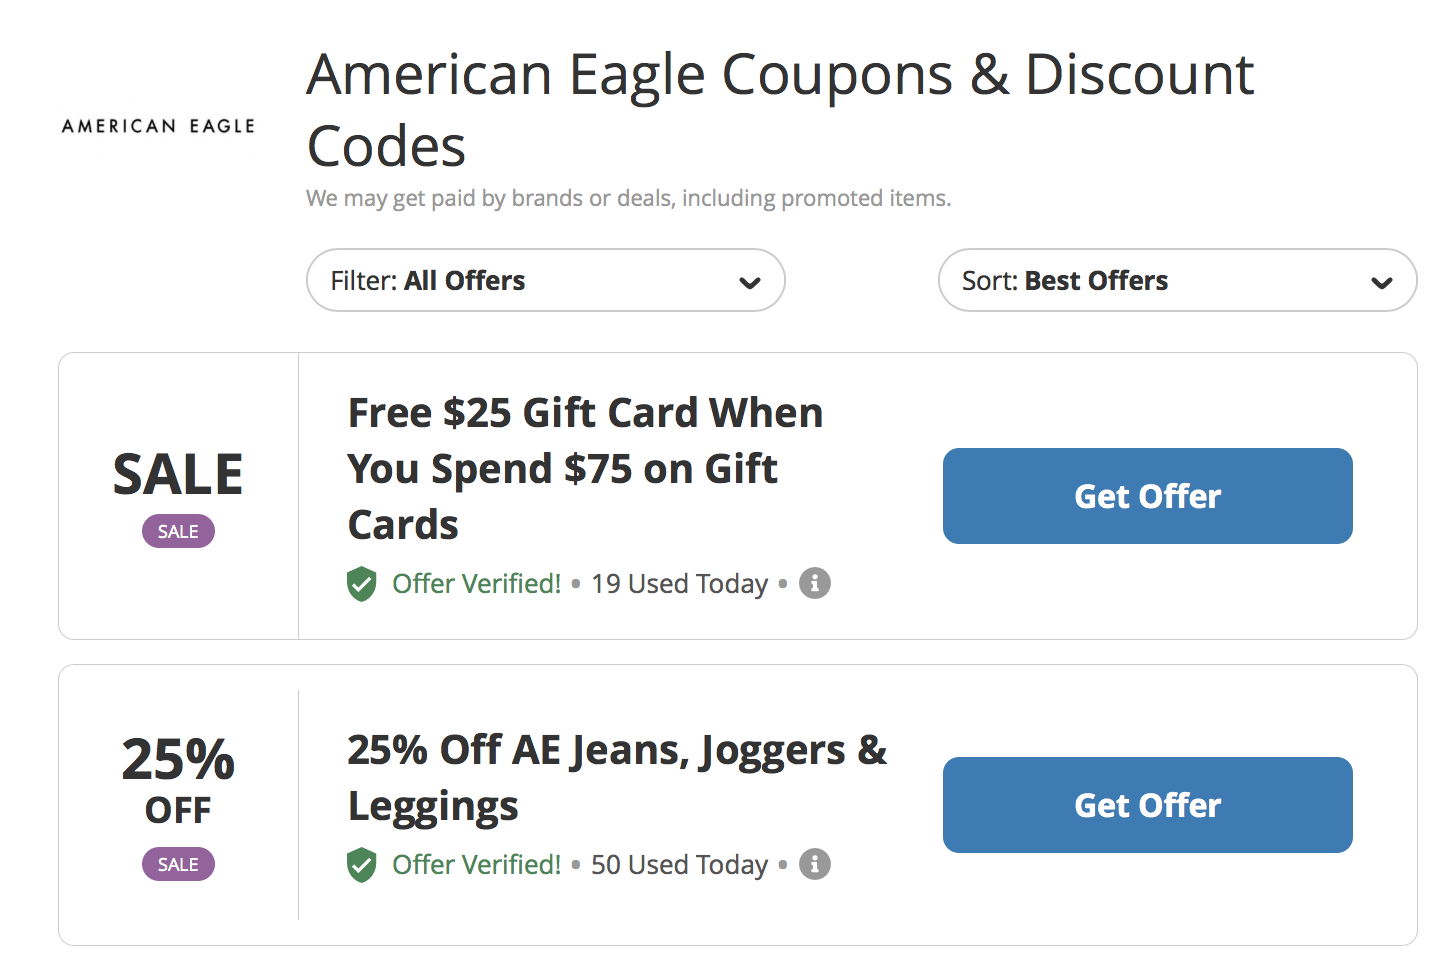 Amazing American Eagle Coupons On Slickdeals - Budget Savvy Diva for Free Printable American Eagle Coupons